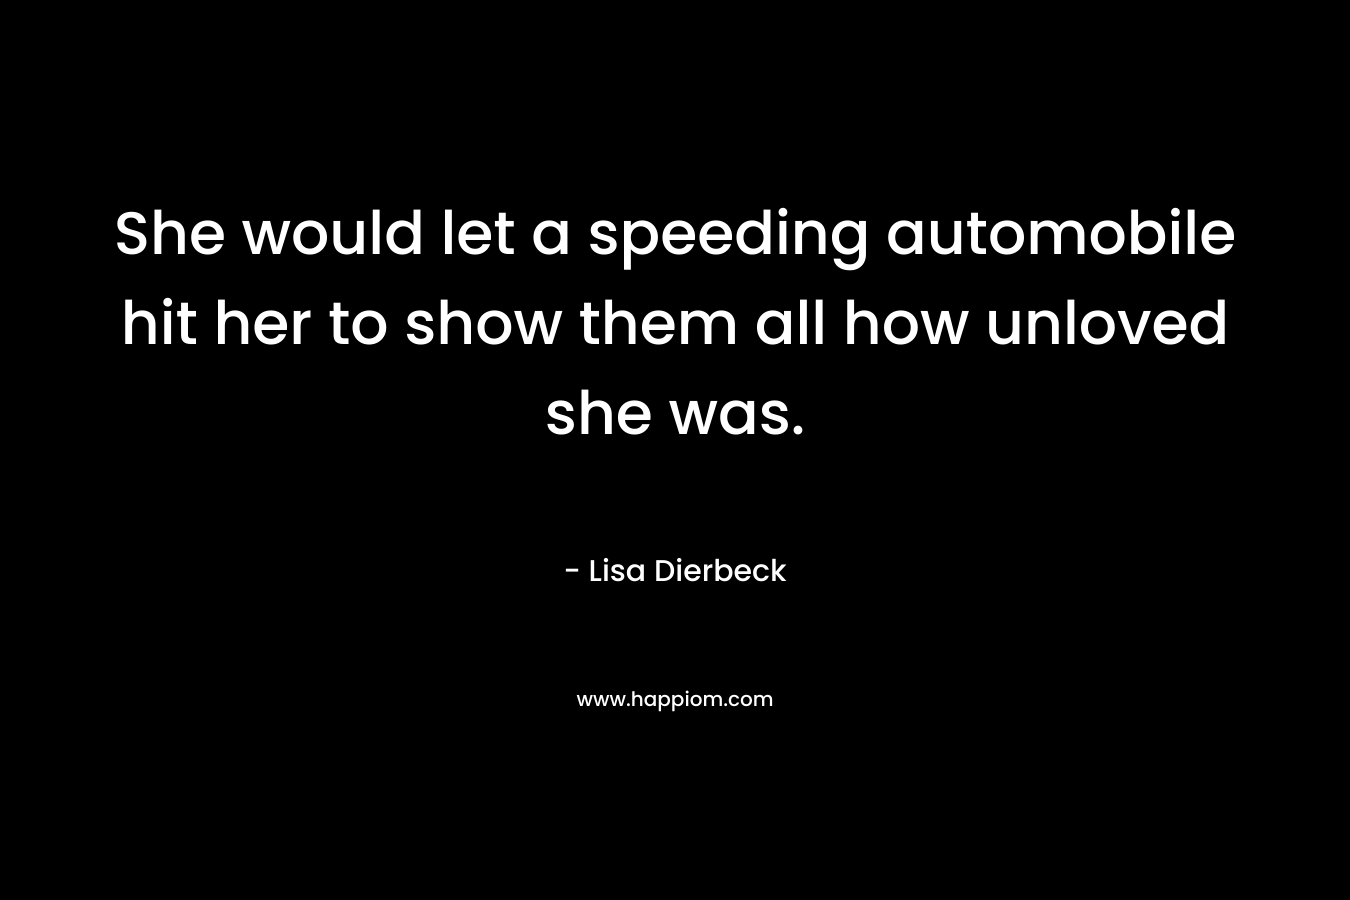 She would let a speeding automobile hit her to show them all how unloved she was.